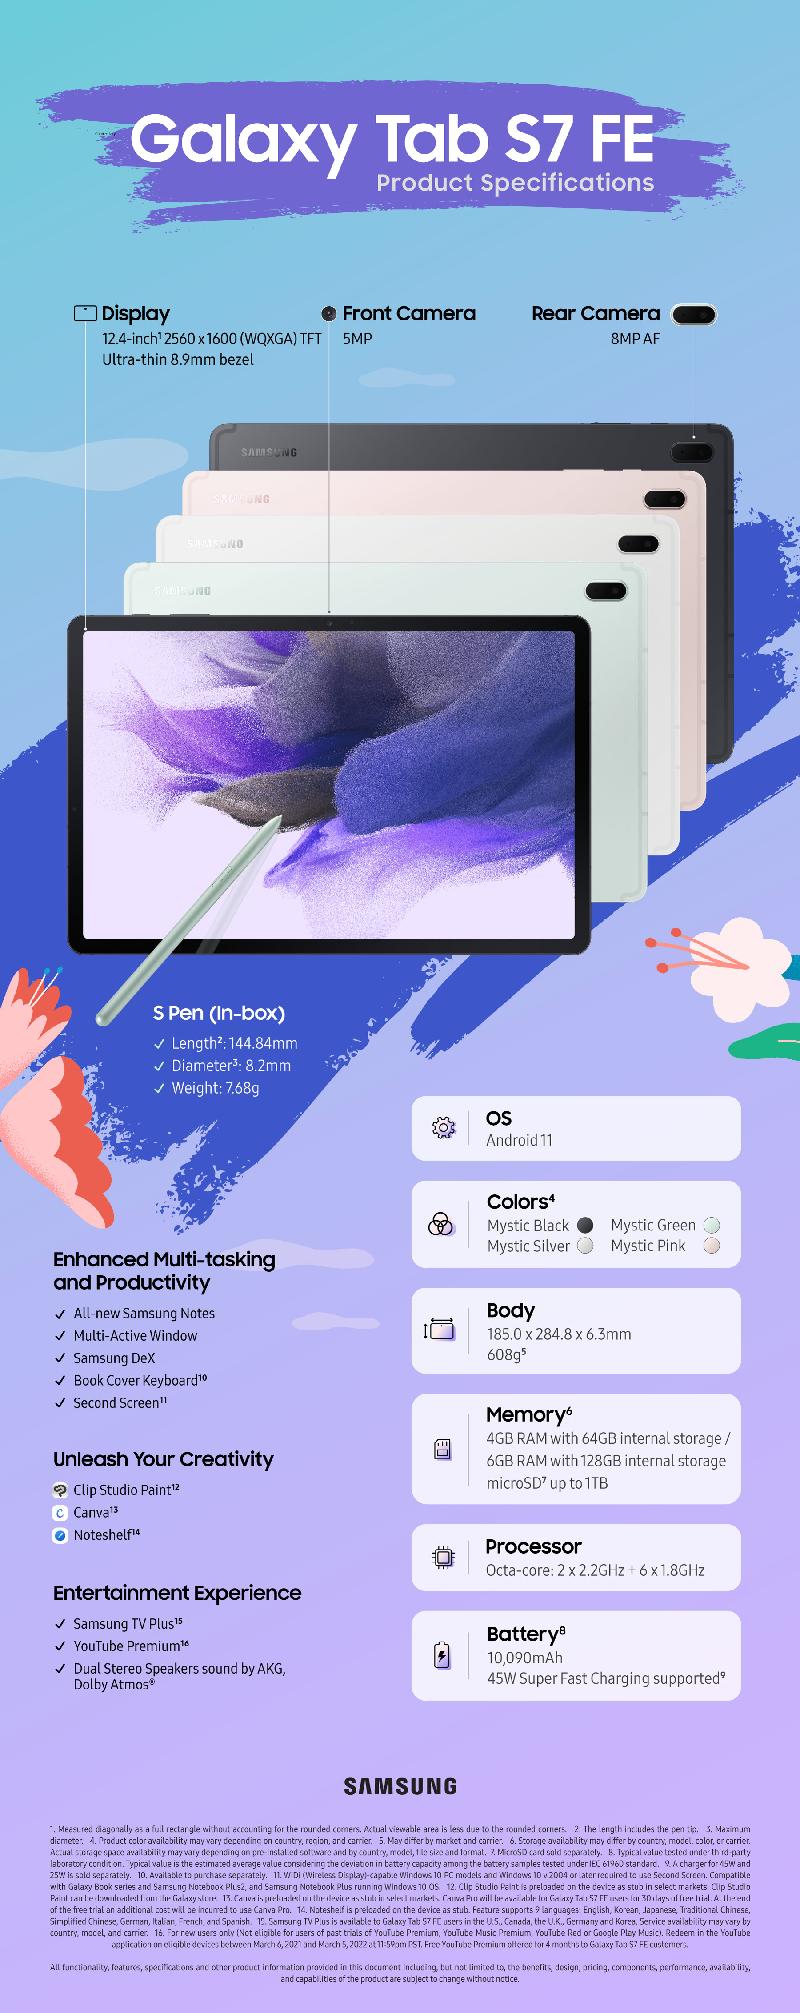 001_galaxy_tab_s7_fe_specification_infographic-1.jpg